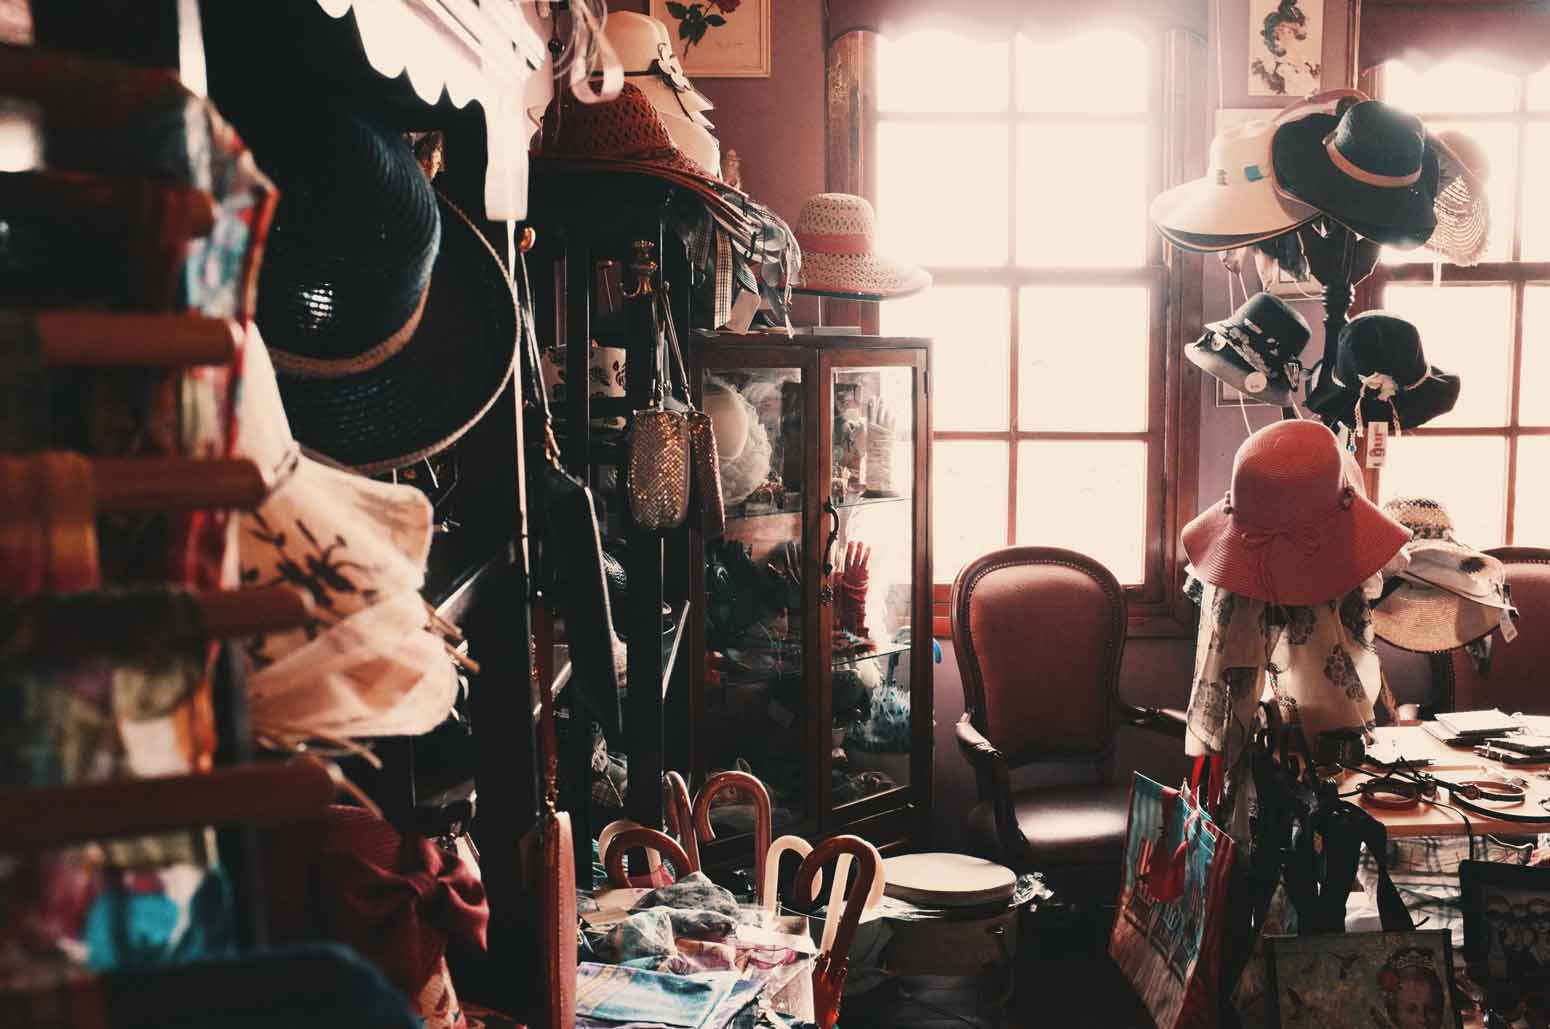 dimly lit room exhibiting a hoarding disorder with clothing and other accessories stacked on top of each other in abundance